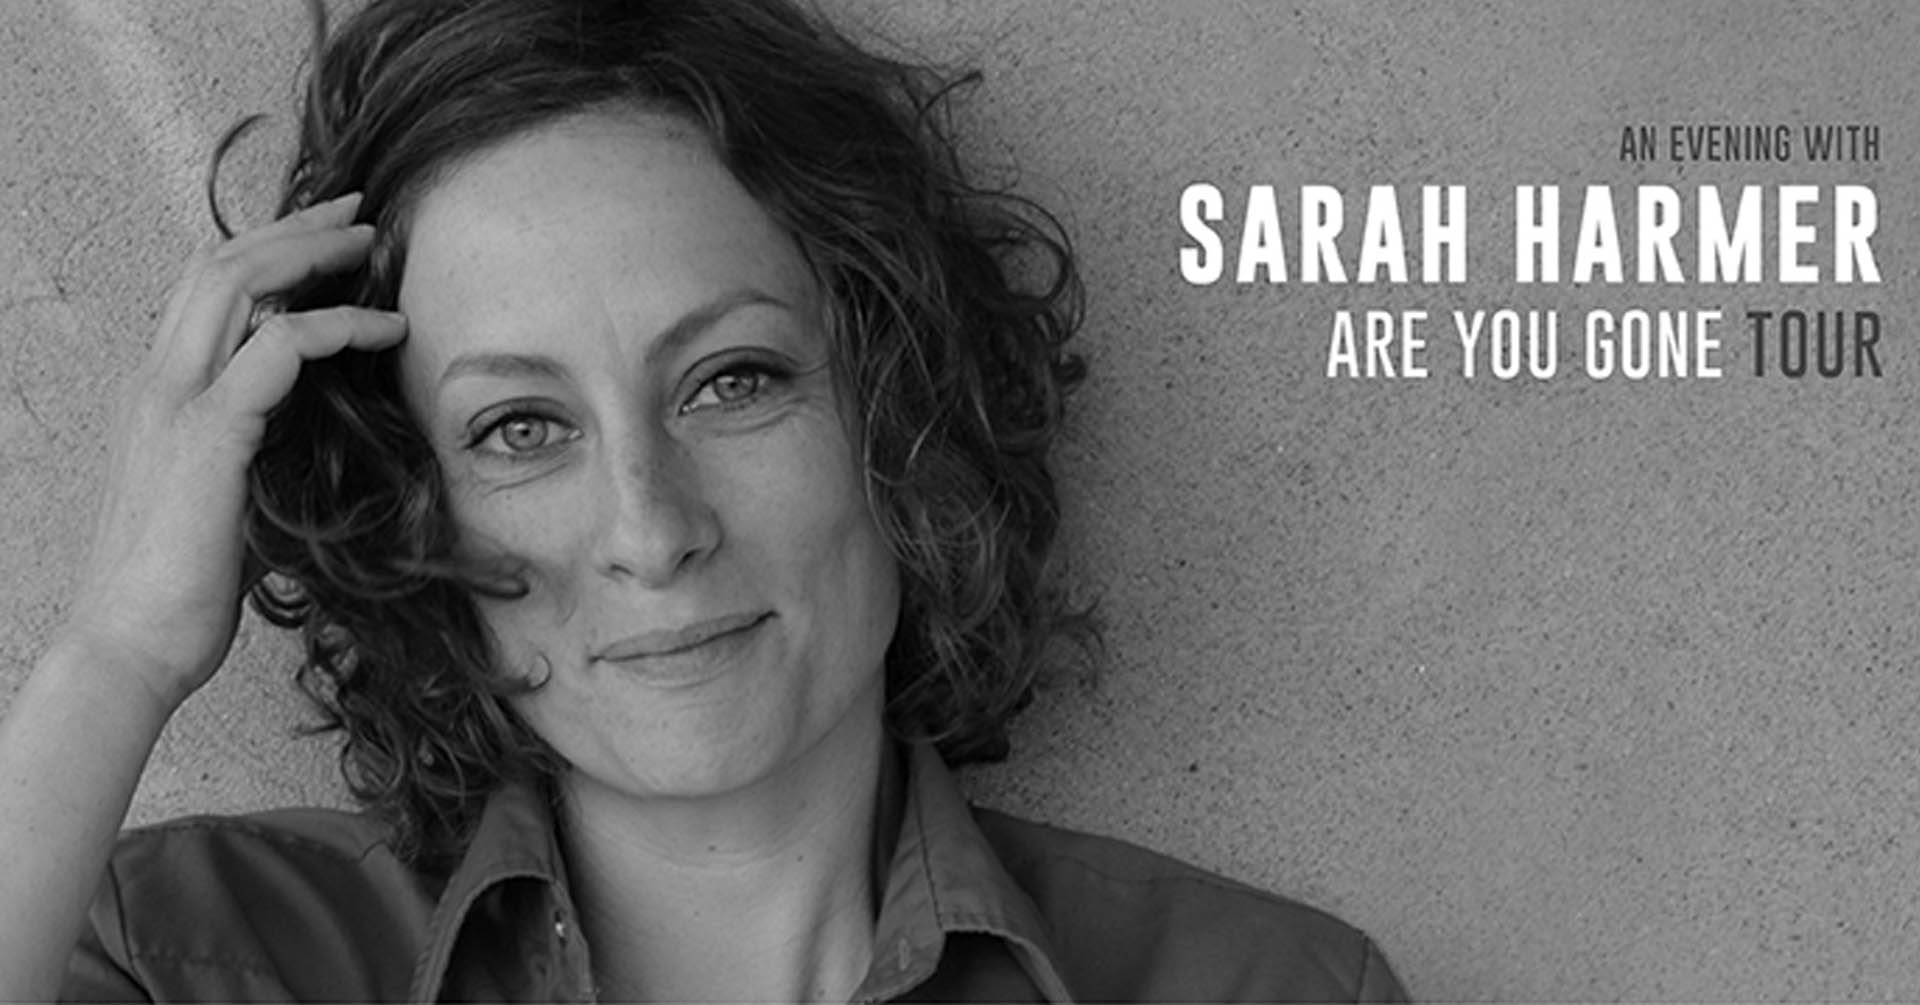 Headshot of Sarah Harmer. Text reads: An evening with Sarah Harmer, Are You Gone tour